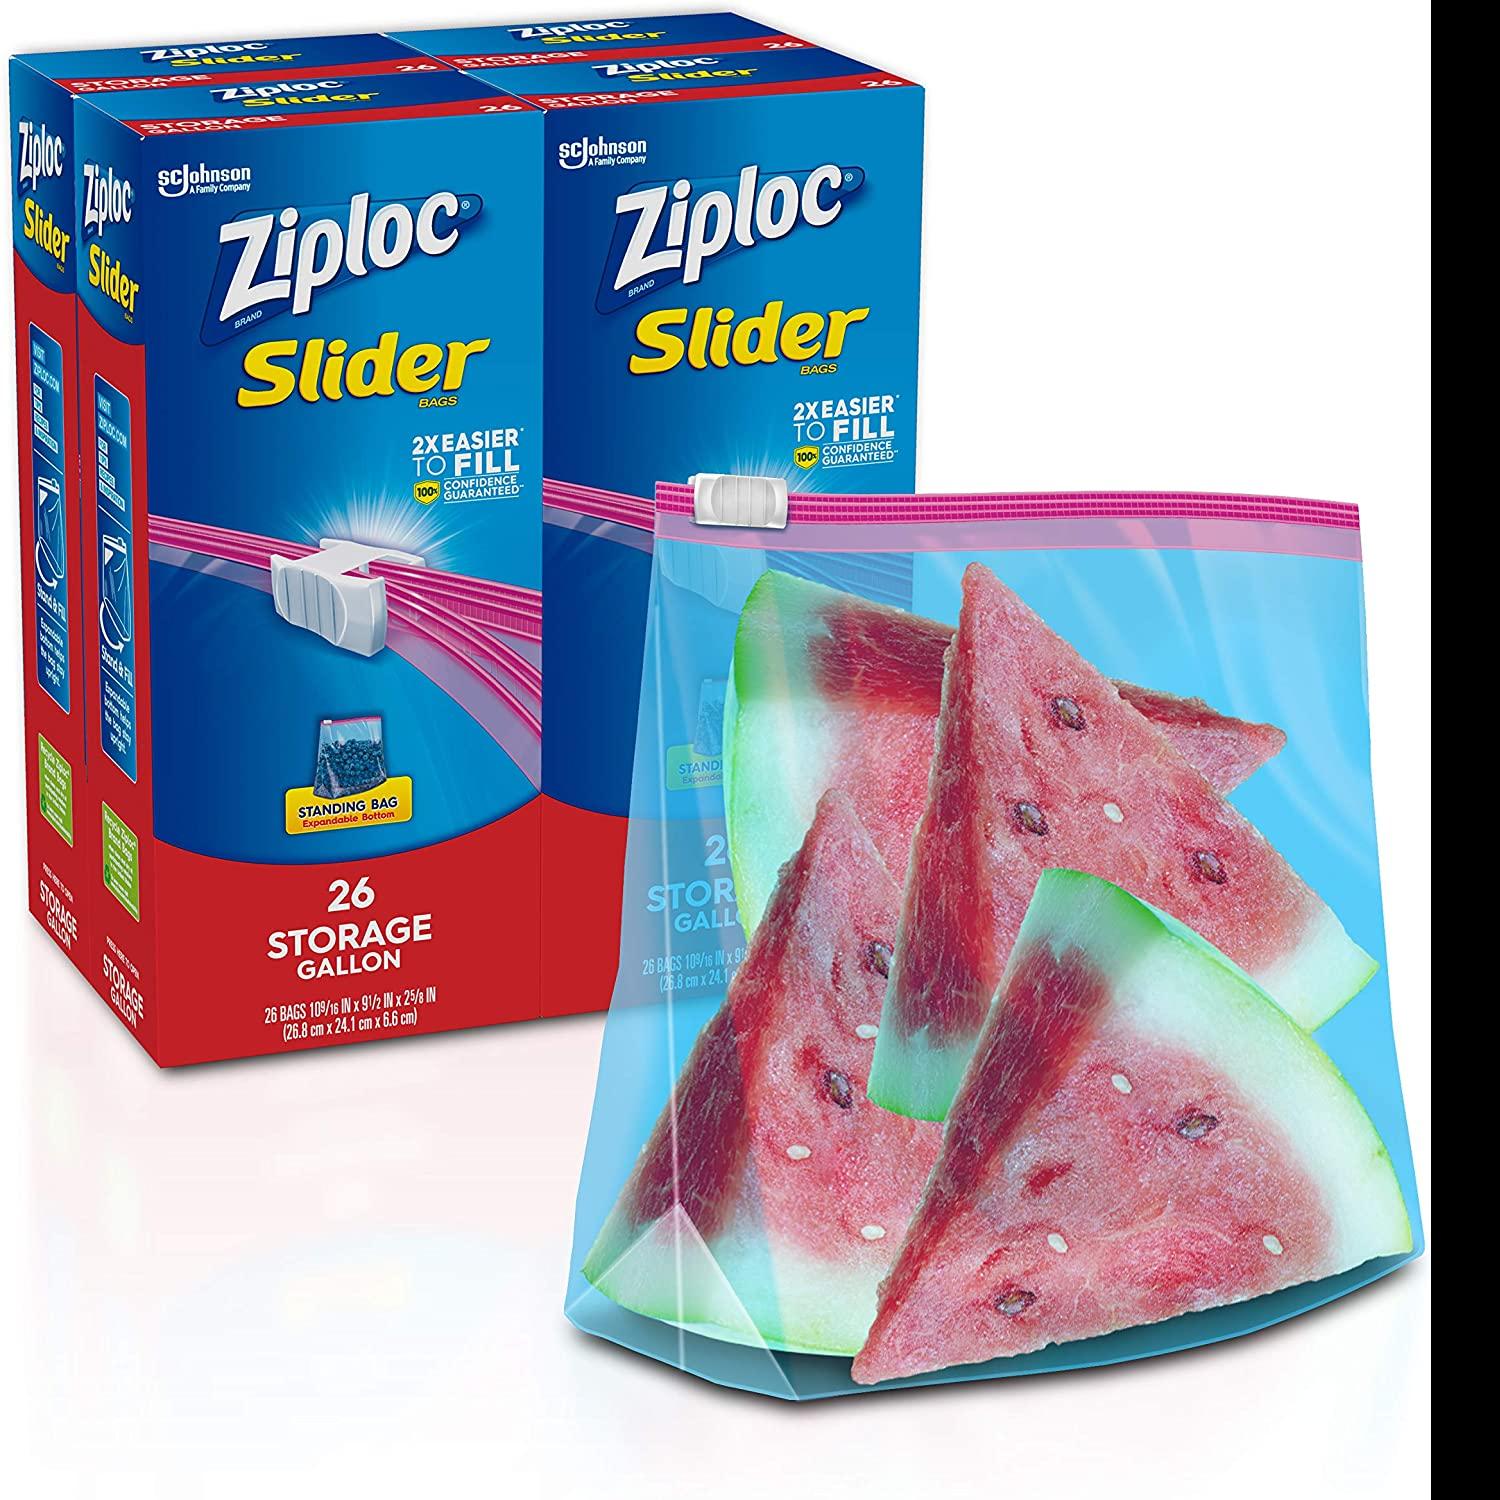 104 Ziploc Slider Gallon Storage Bags with Power Shield Technology for $8.30